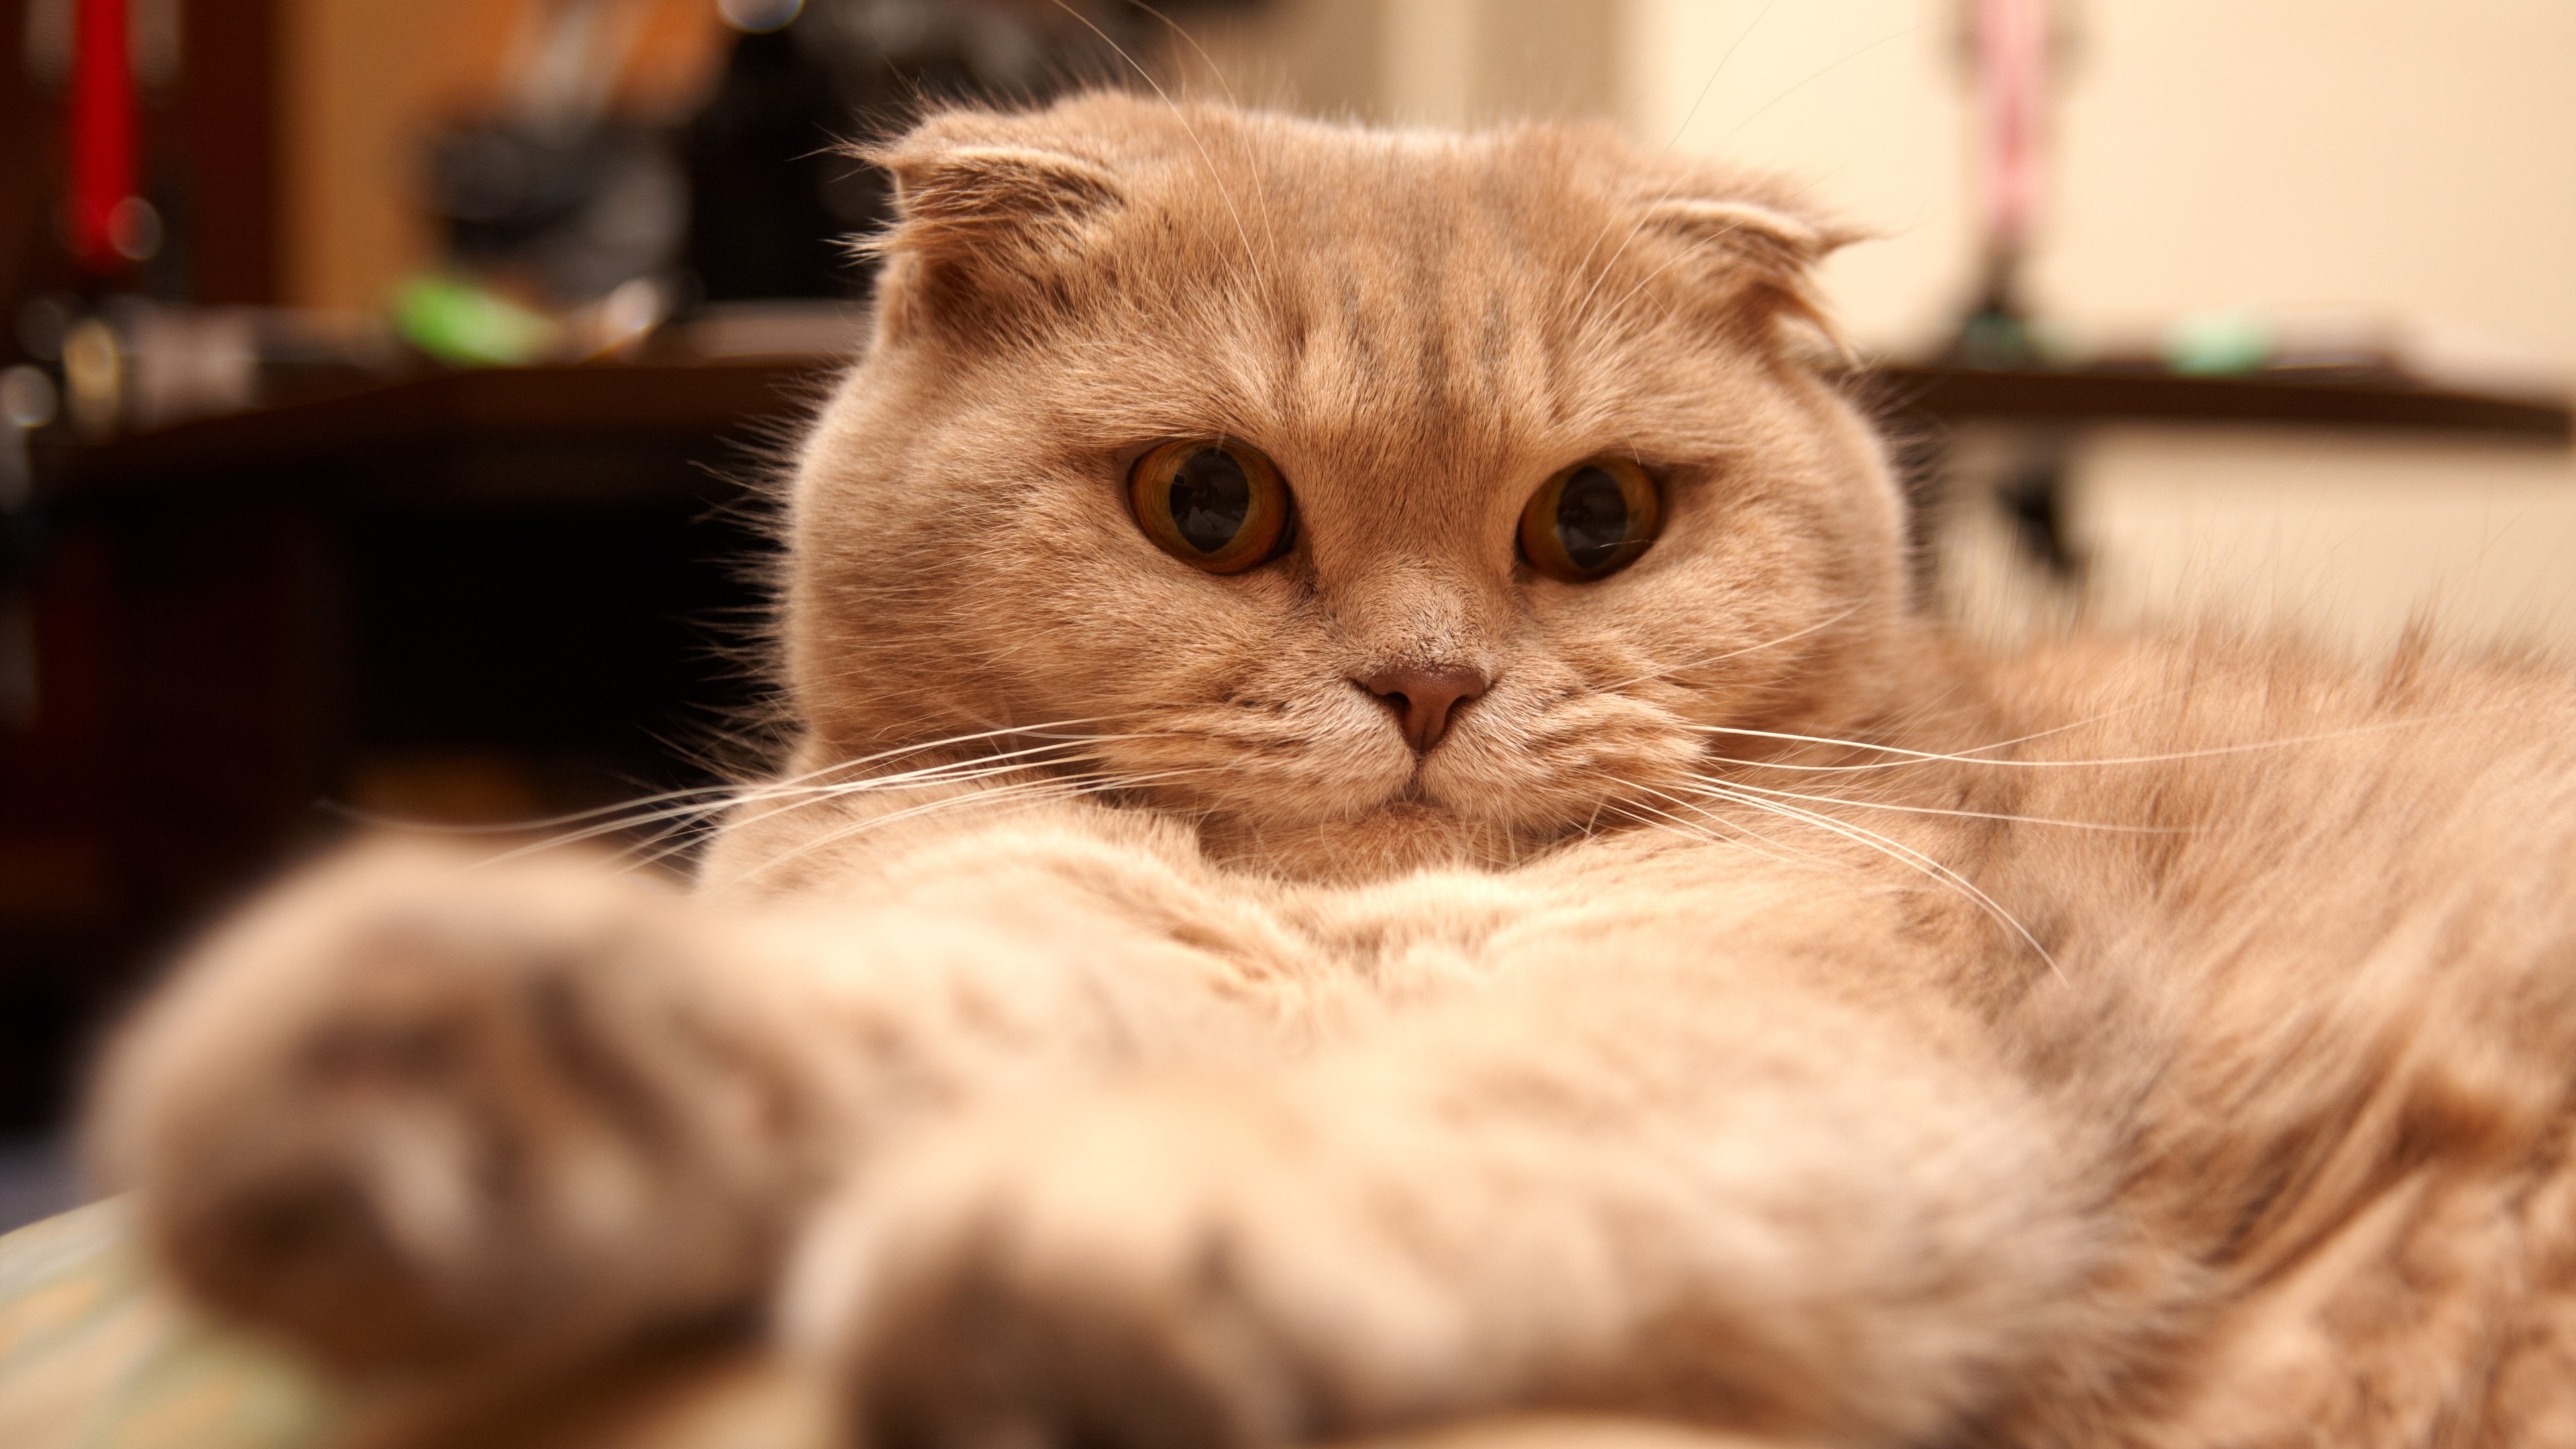 Tired Scottish Fold Cat for 3840 x 2160 Ultra HD resolution